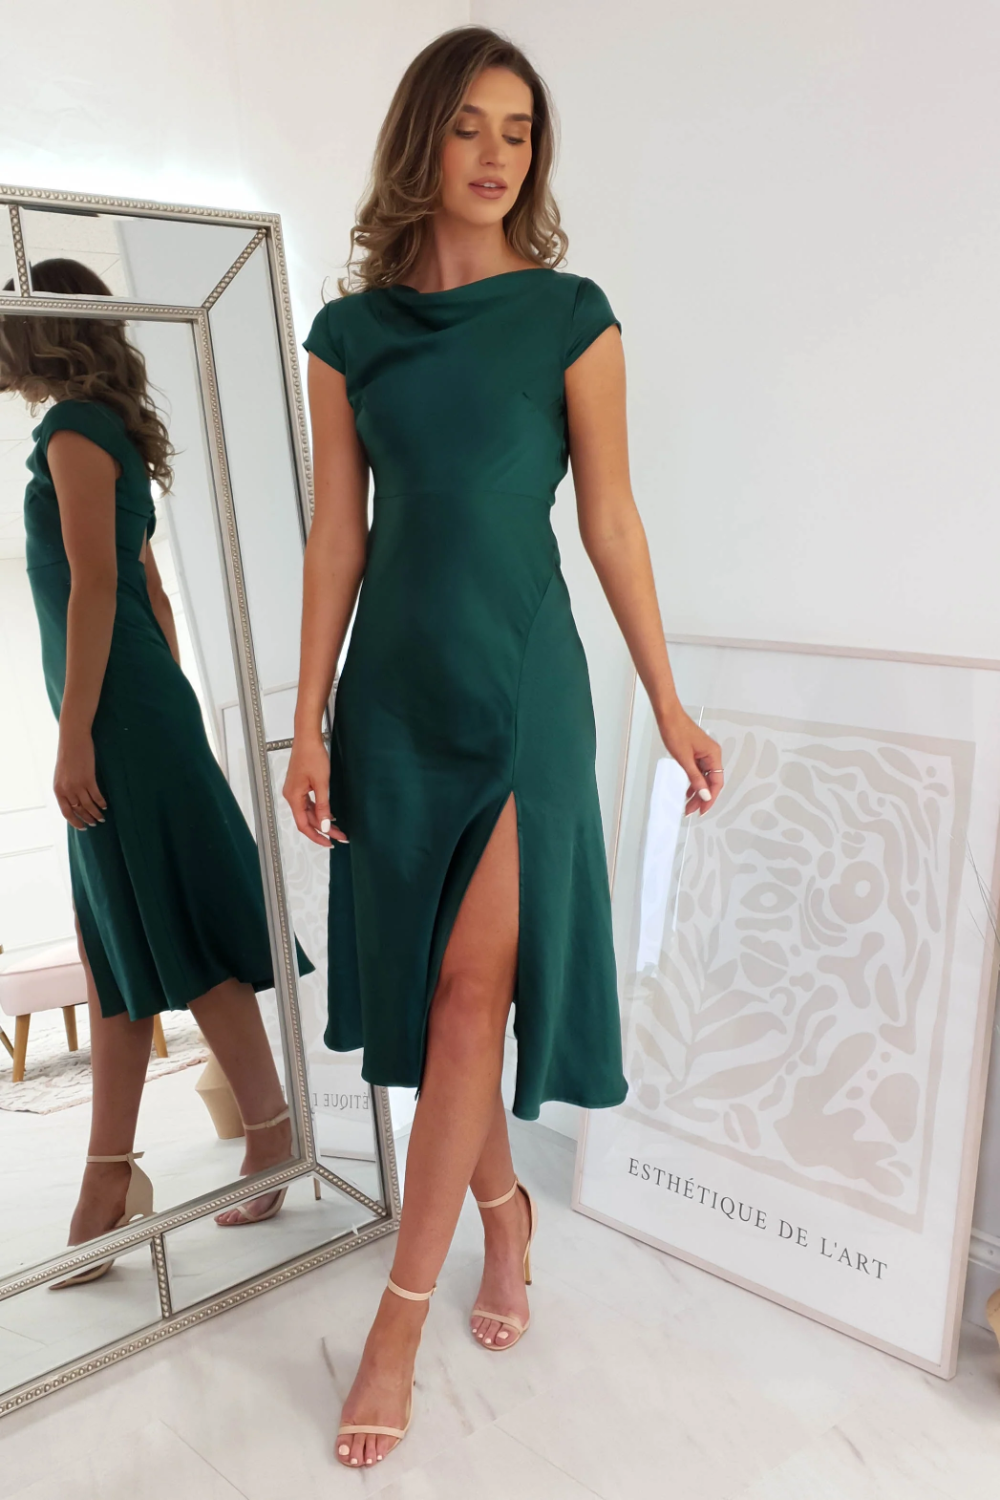 How to Wear Green Midi Dress: Best 13 Breezy & Refreshing Outfits for Ladies